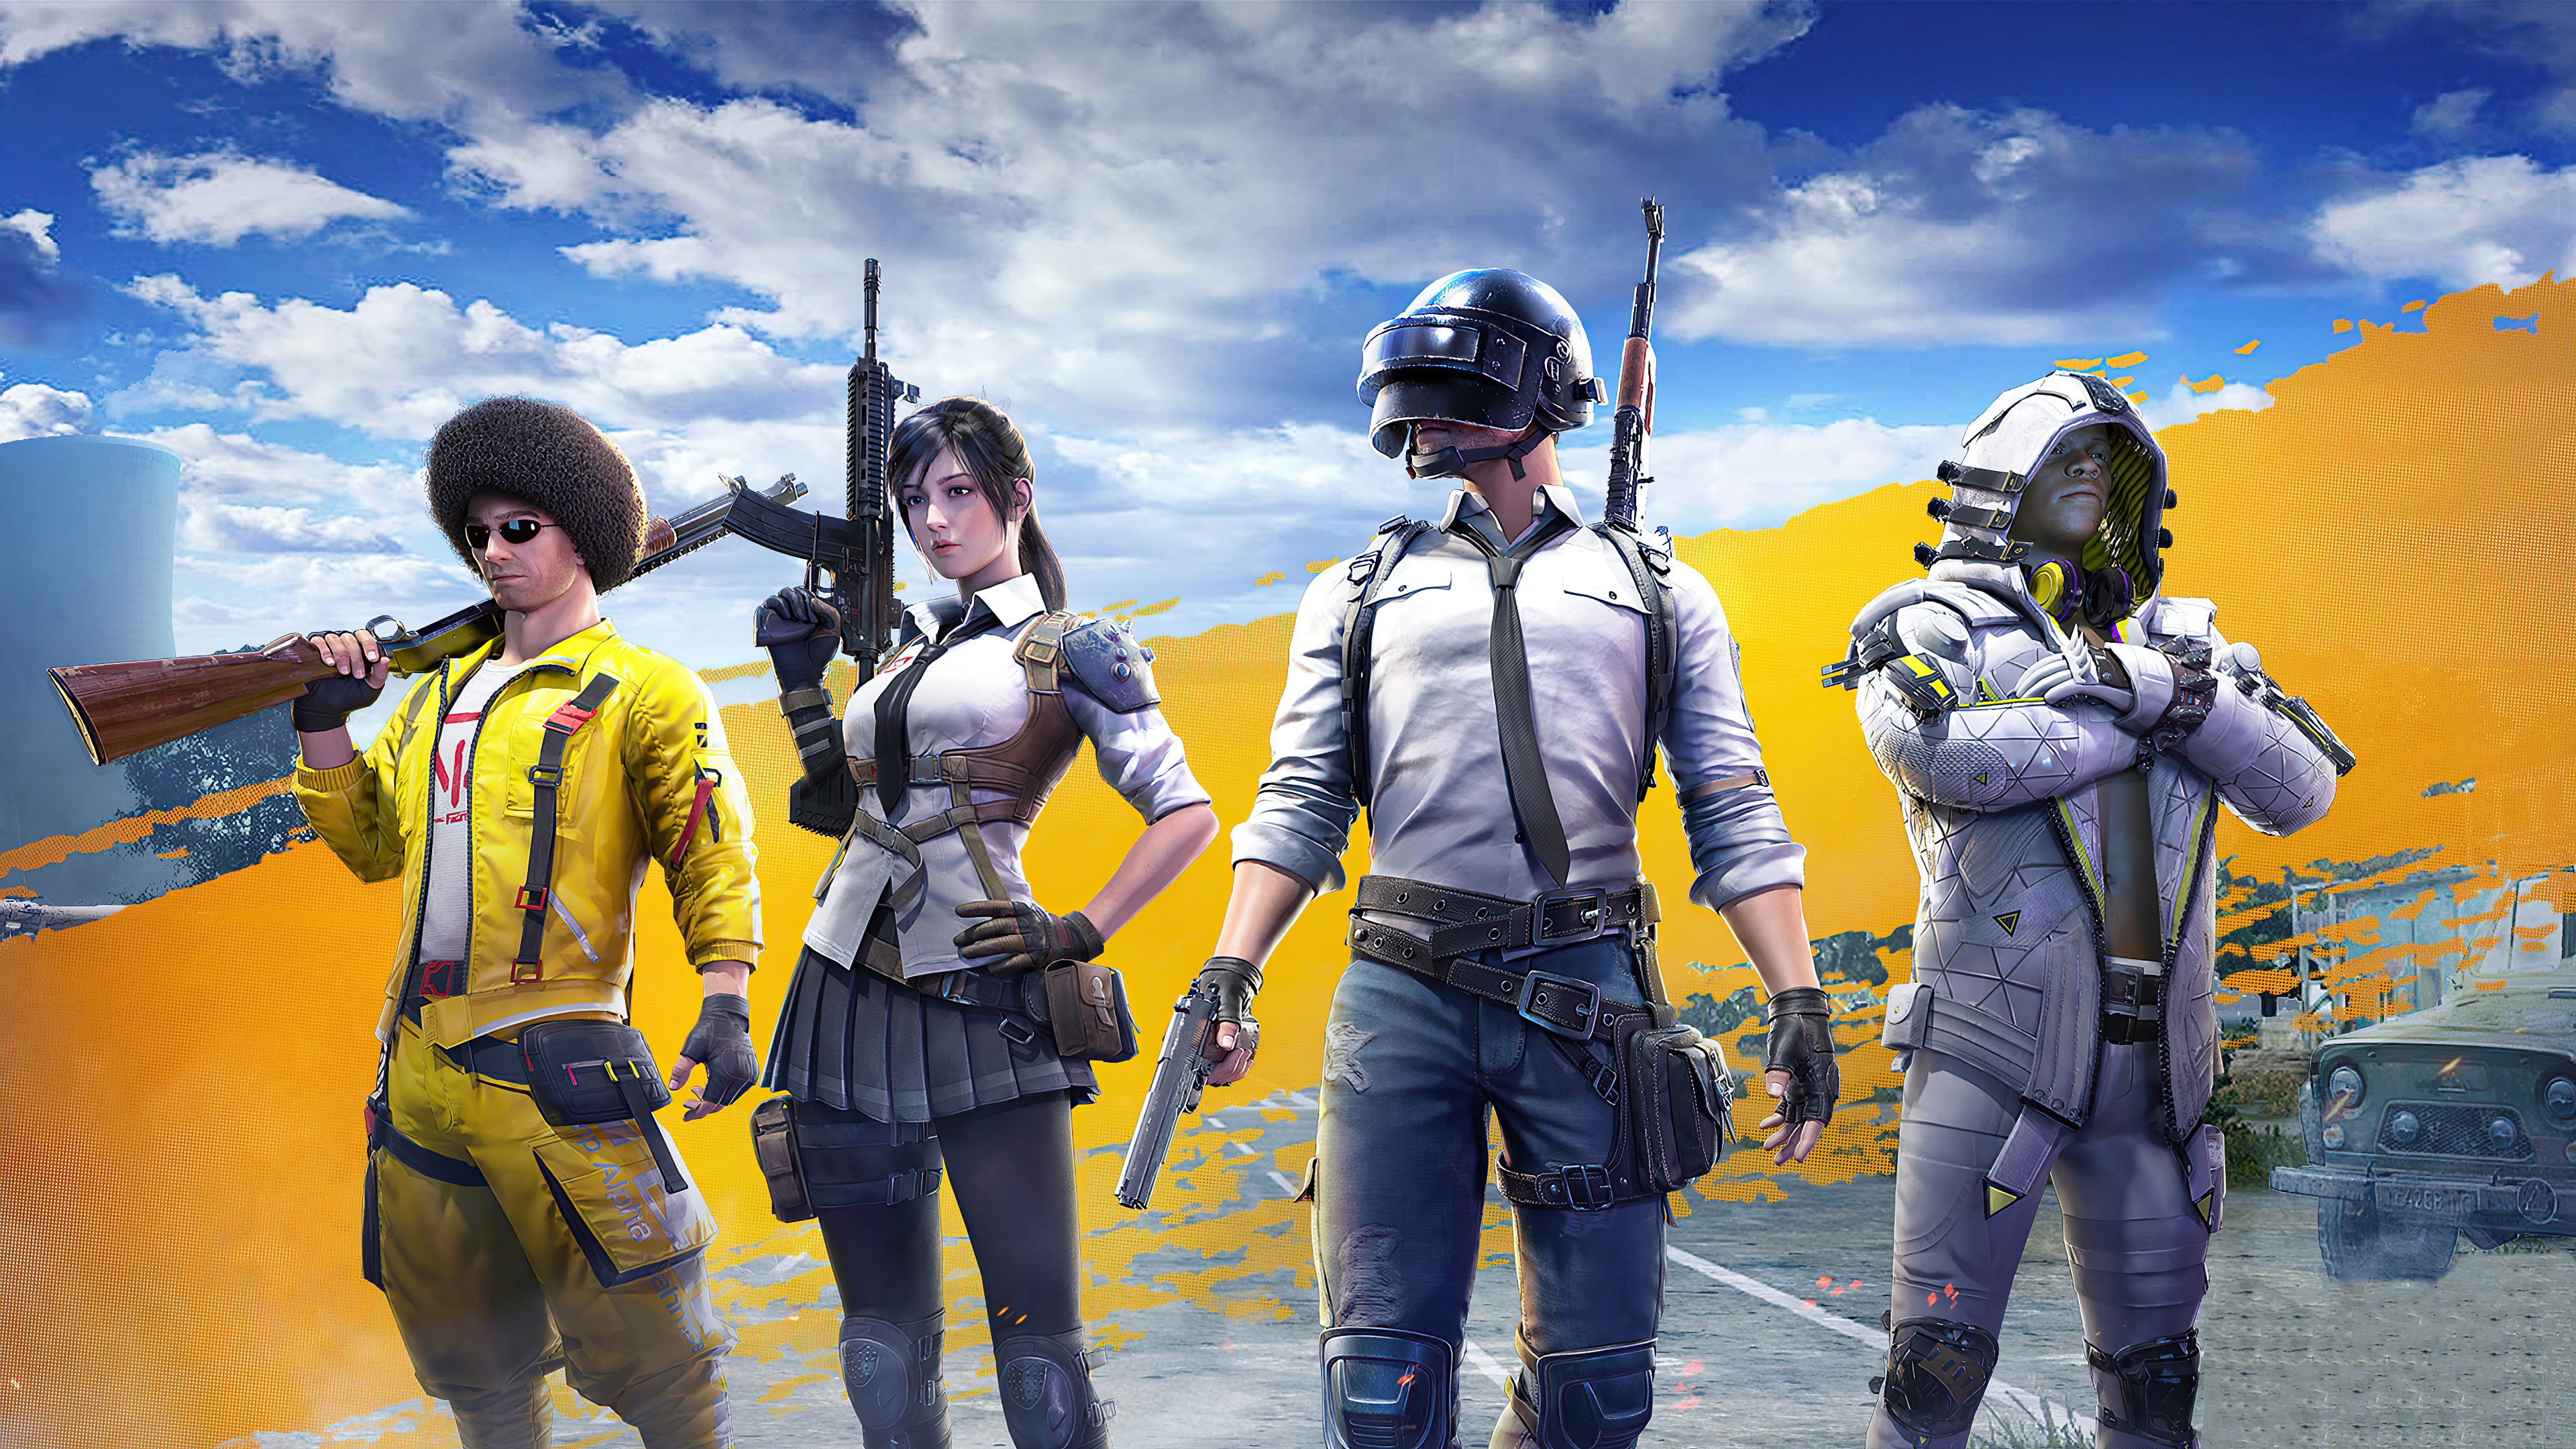 Download 3840x2160 Wallpaper 2020 Game, Pubg Game, Main Characters, 4 K,  Uhd 16:9, Widescreen, 3840x2160 Hd Image, Background, 34177